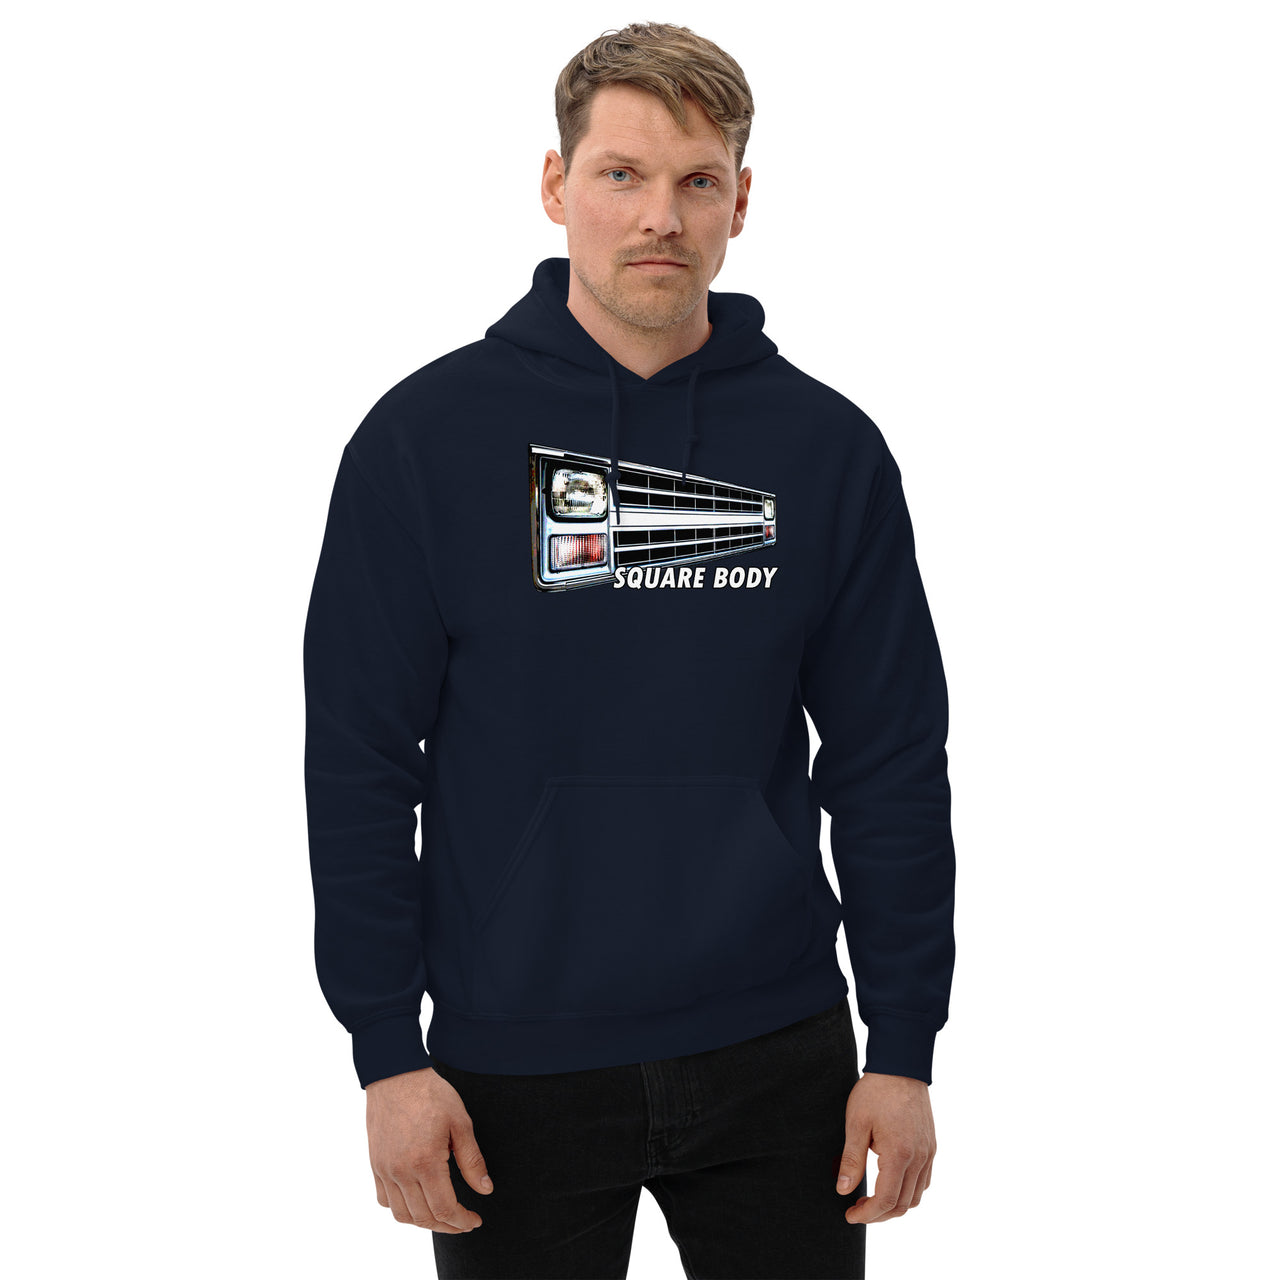 Square Body Truck 80s Angled Grille Hoodie modeled in navy